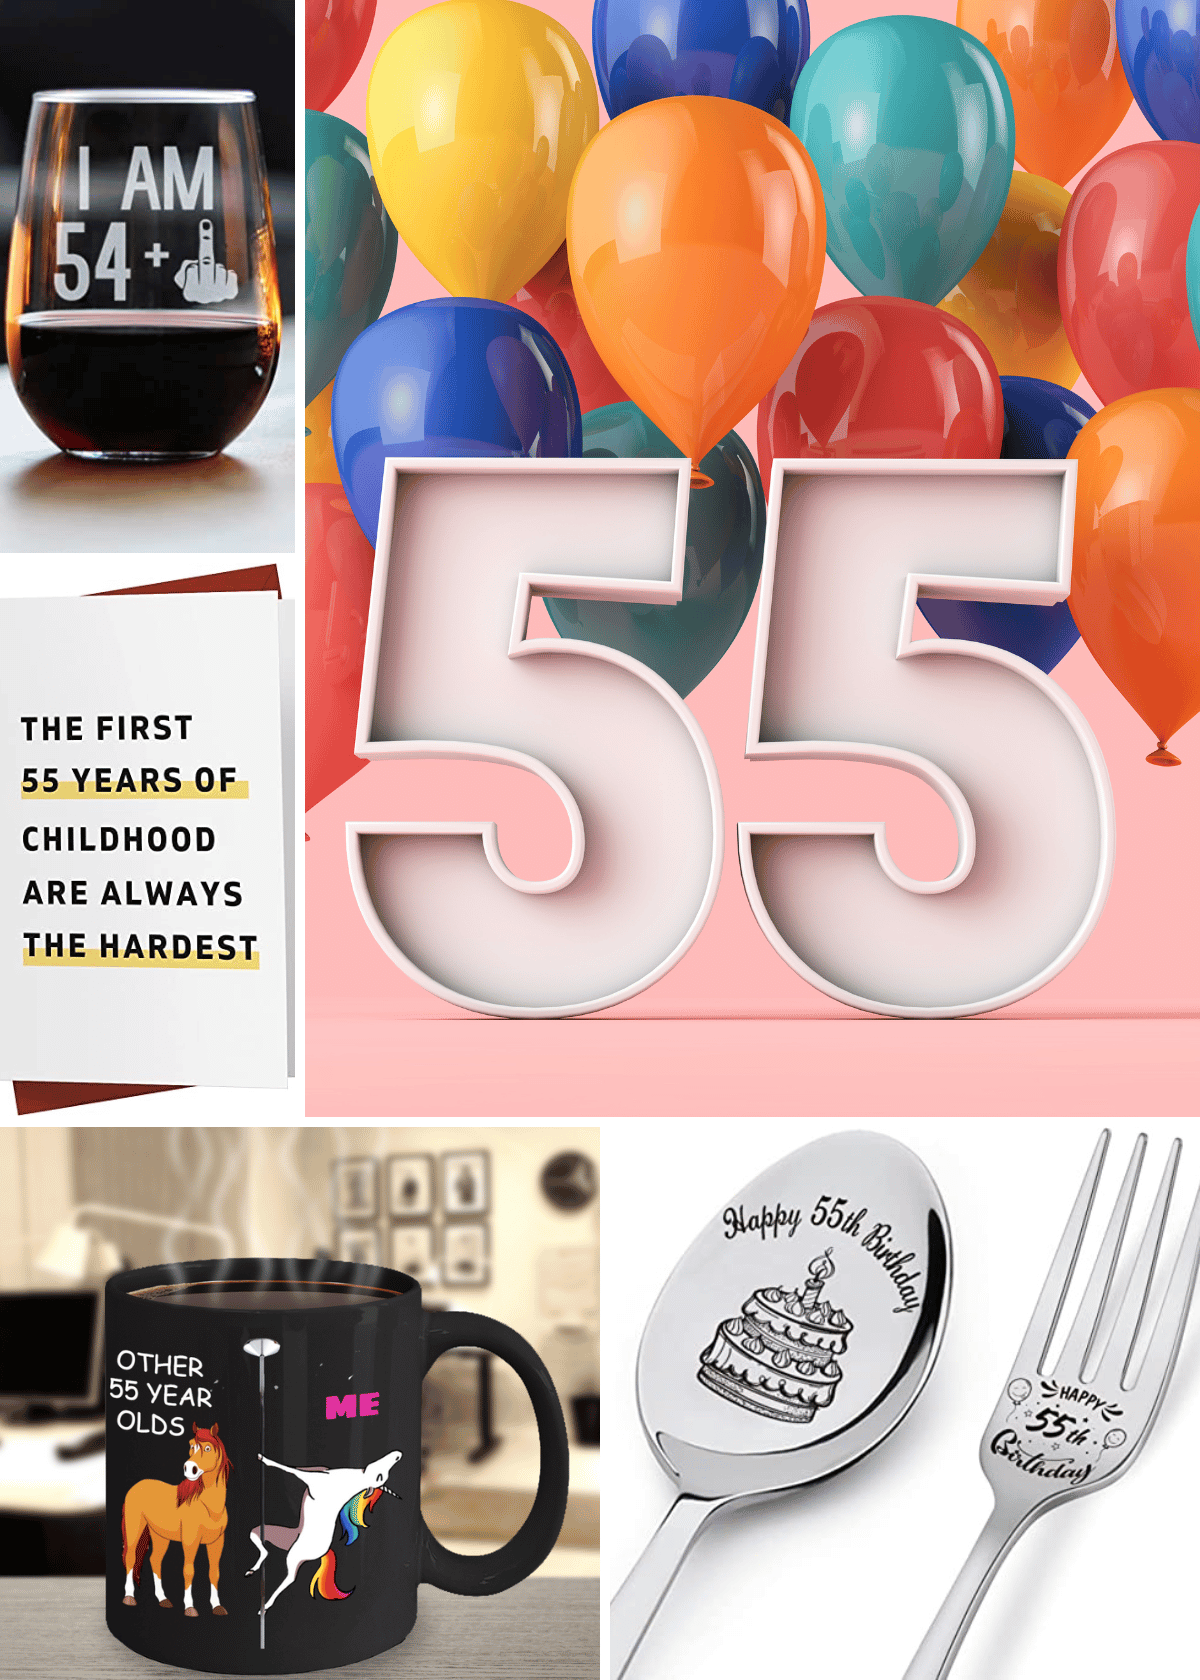 55th Birthday Gifts: Top Picks on Amazon to Make the Day Memorable